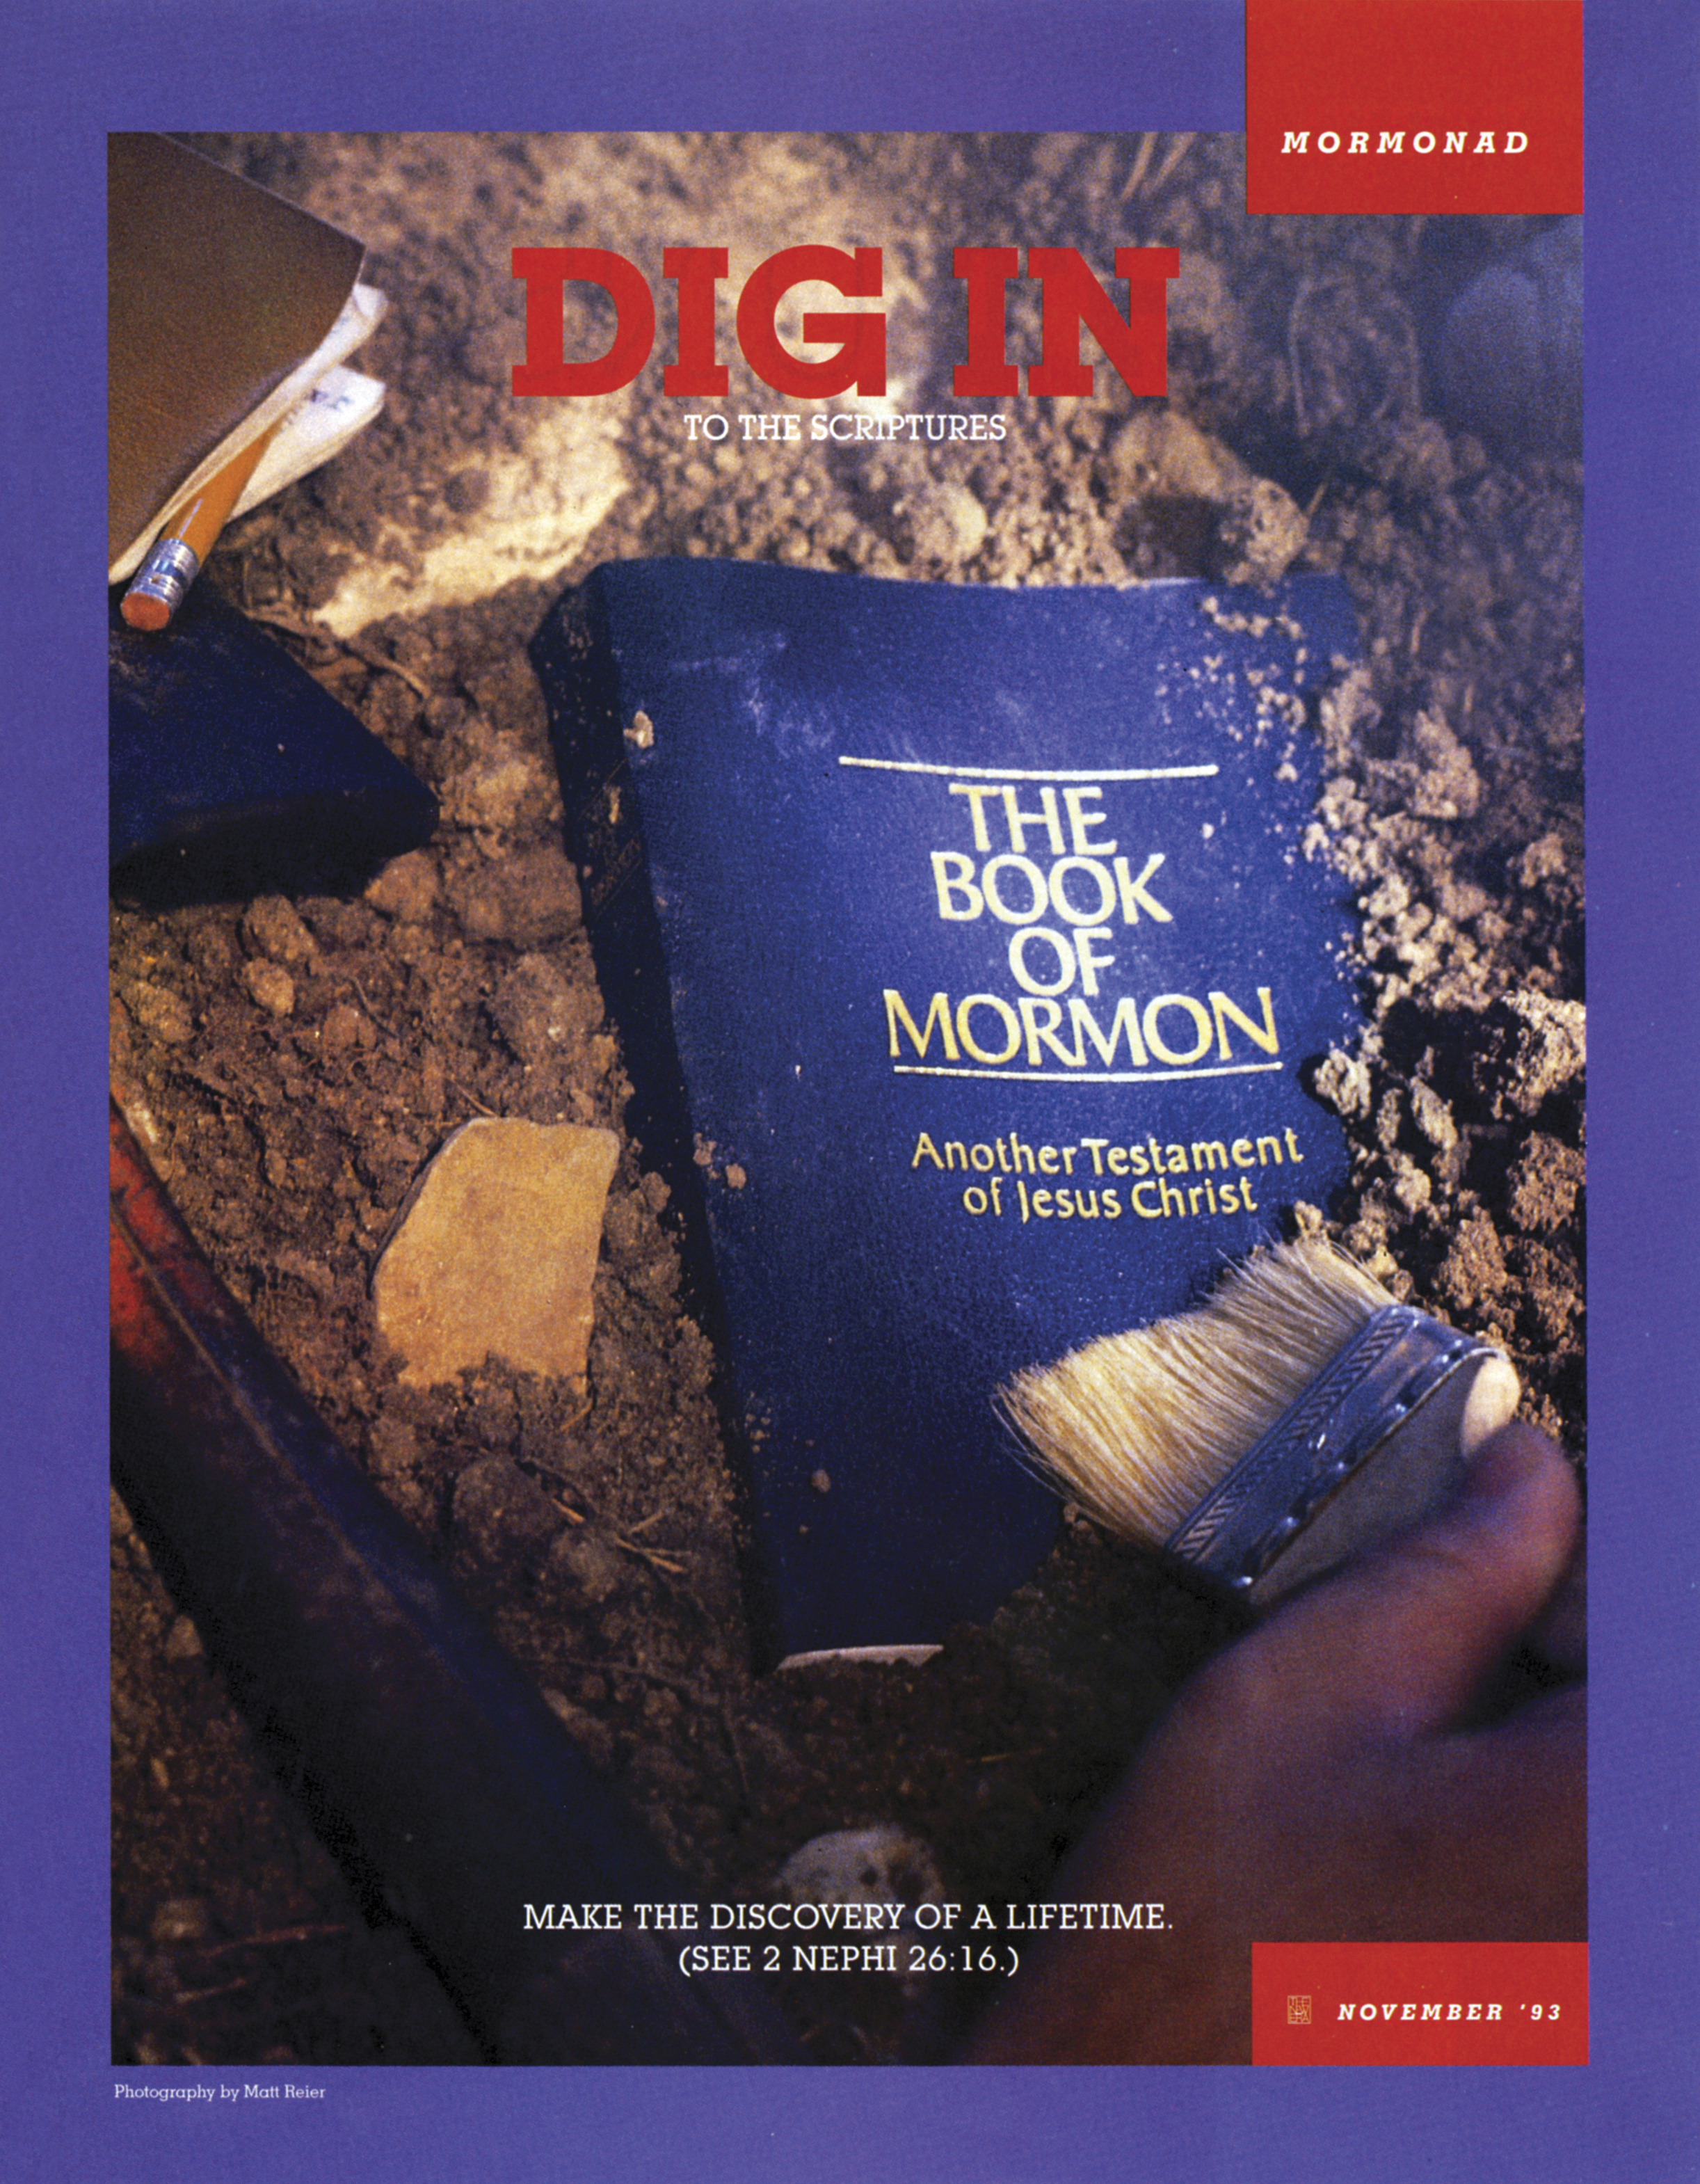 Dig In to the Scriptures. Make the discovery of a lifetime. (See 2 Nephi 26:16.) Nov. 1993 © undefined ipCode 1.